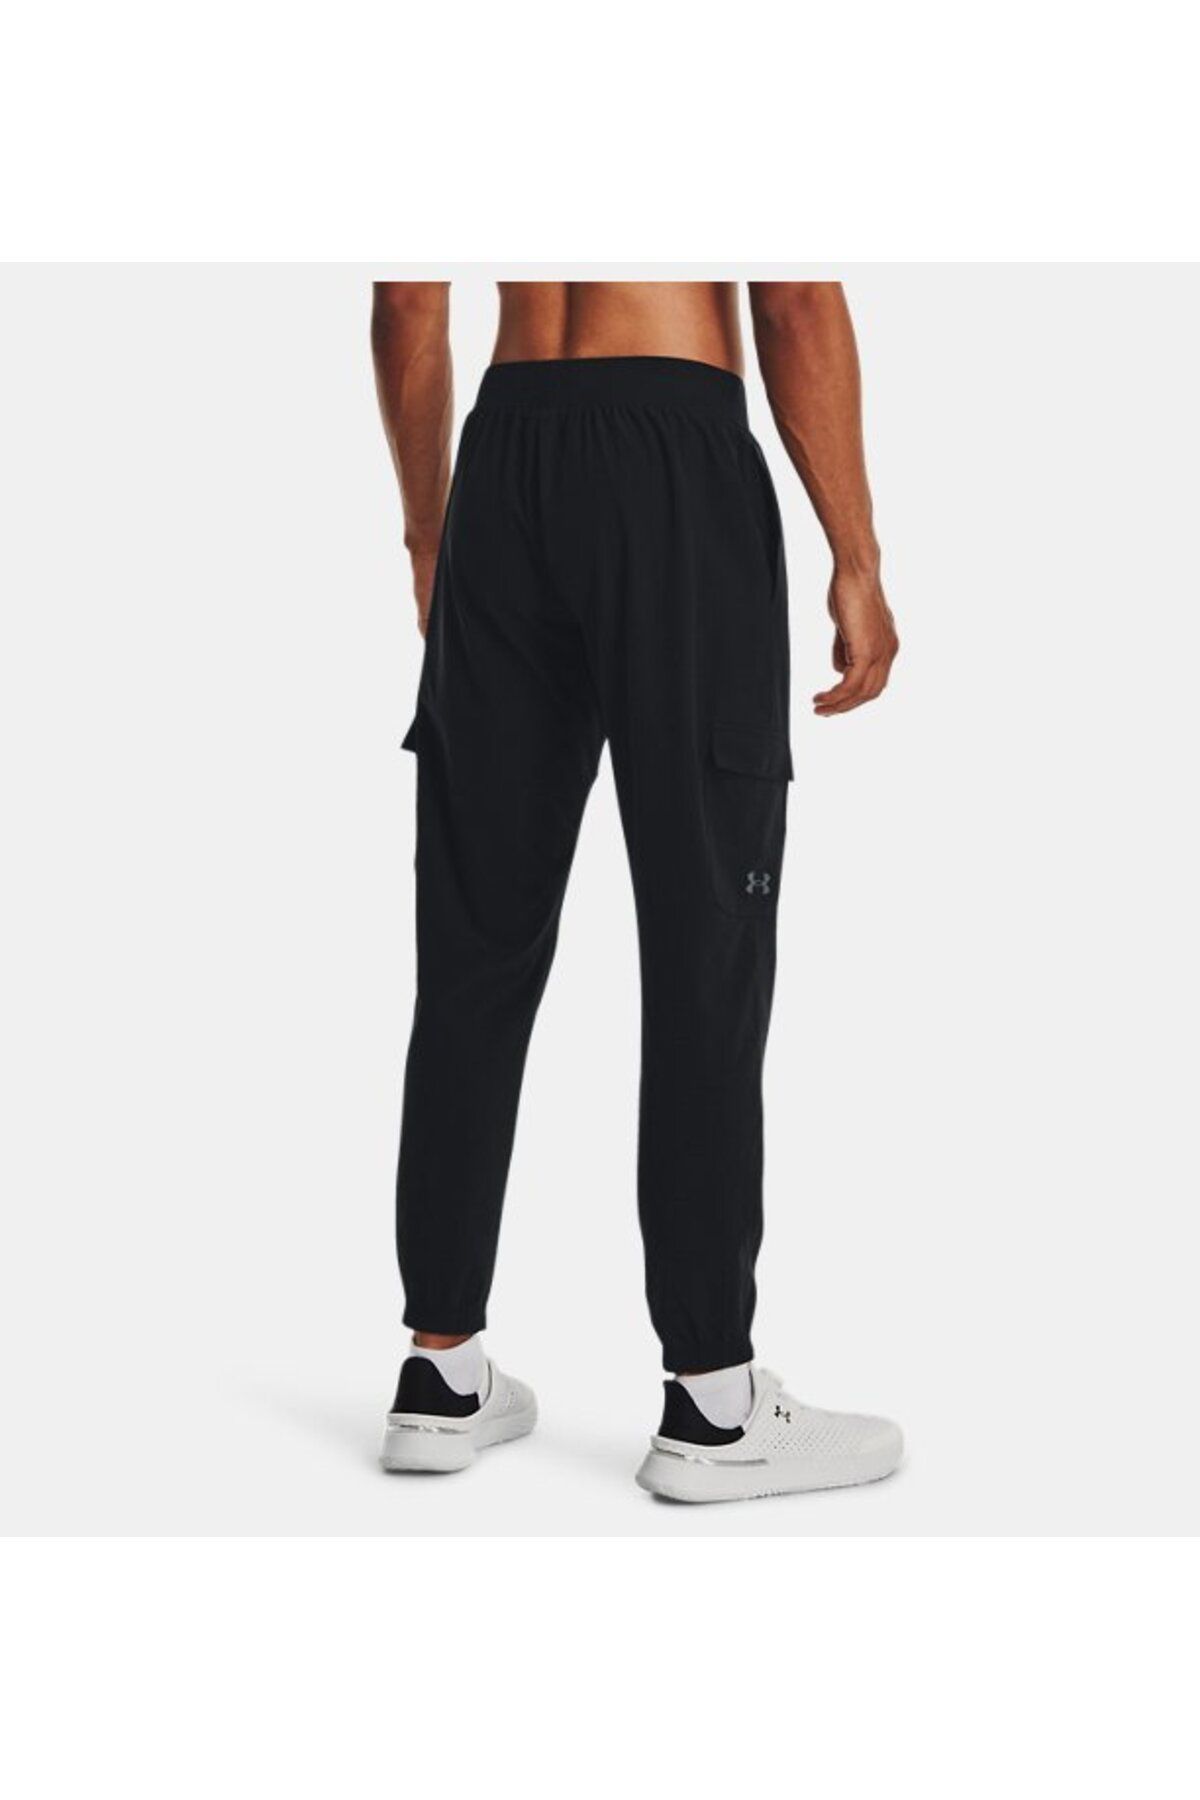 Under Armour Men's Stretch Woven Joggers